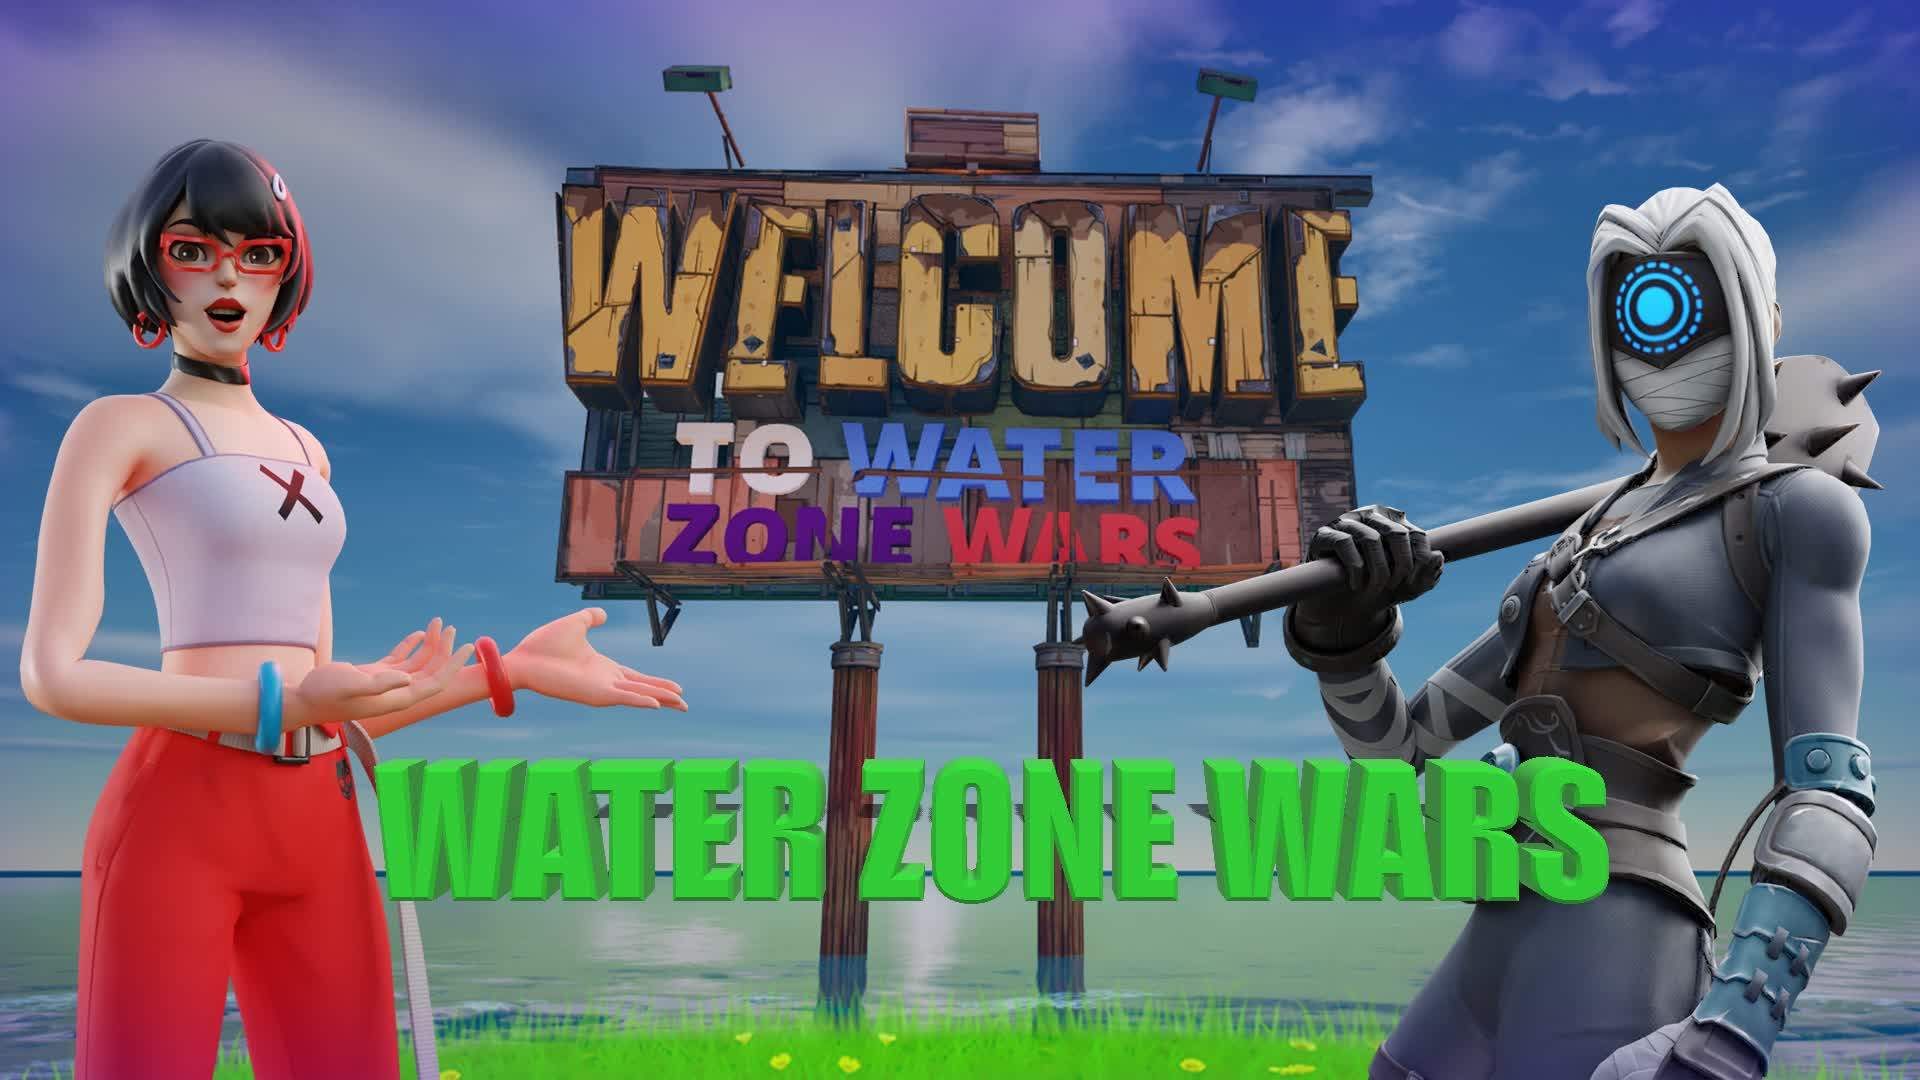 🤩 16 Players Water Zone Wars 🌊🔫